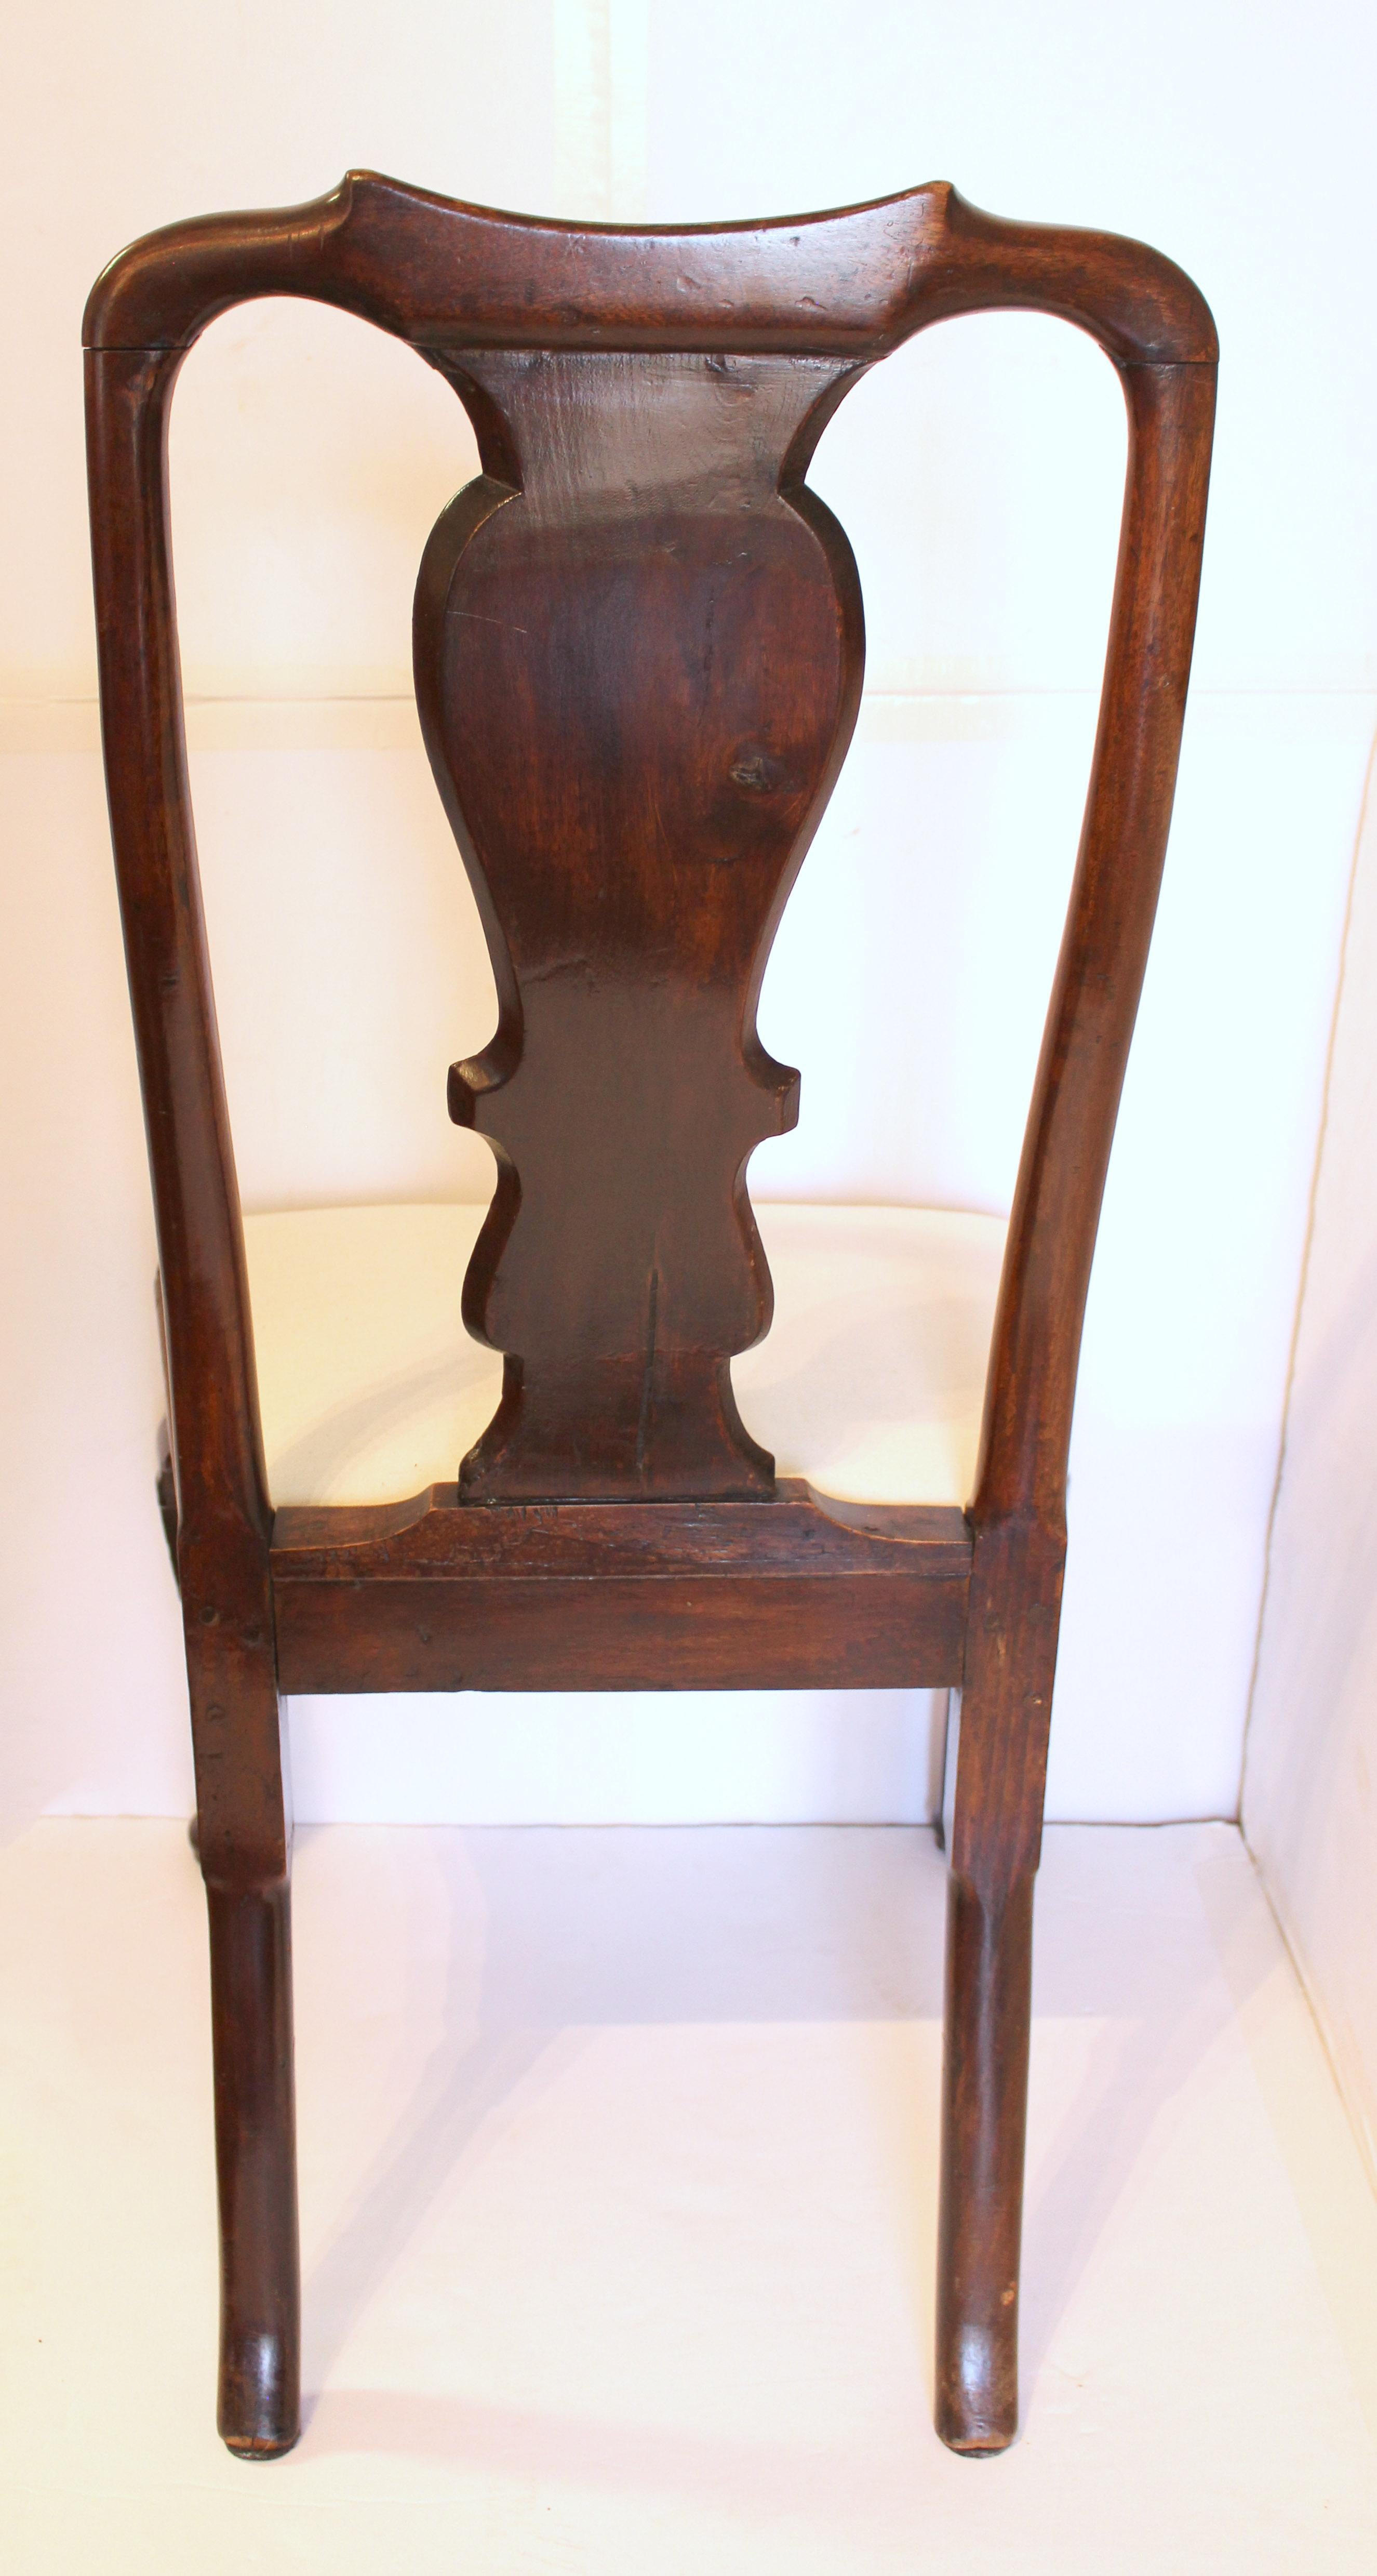 Circa 1720-40 Queen Anne Side Chair, English In Good Condition For Sale In Chapel Hill, NC